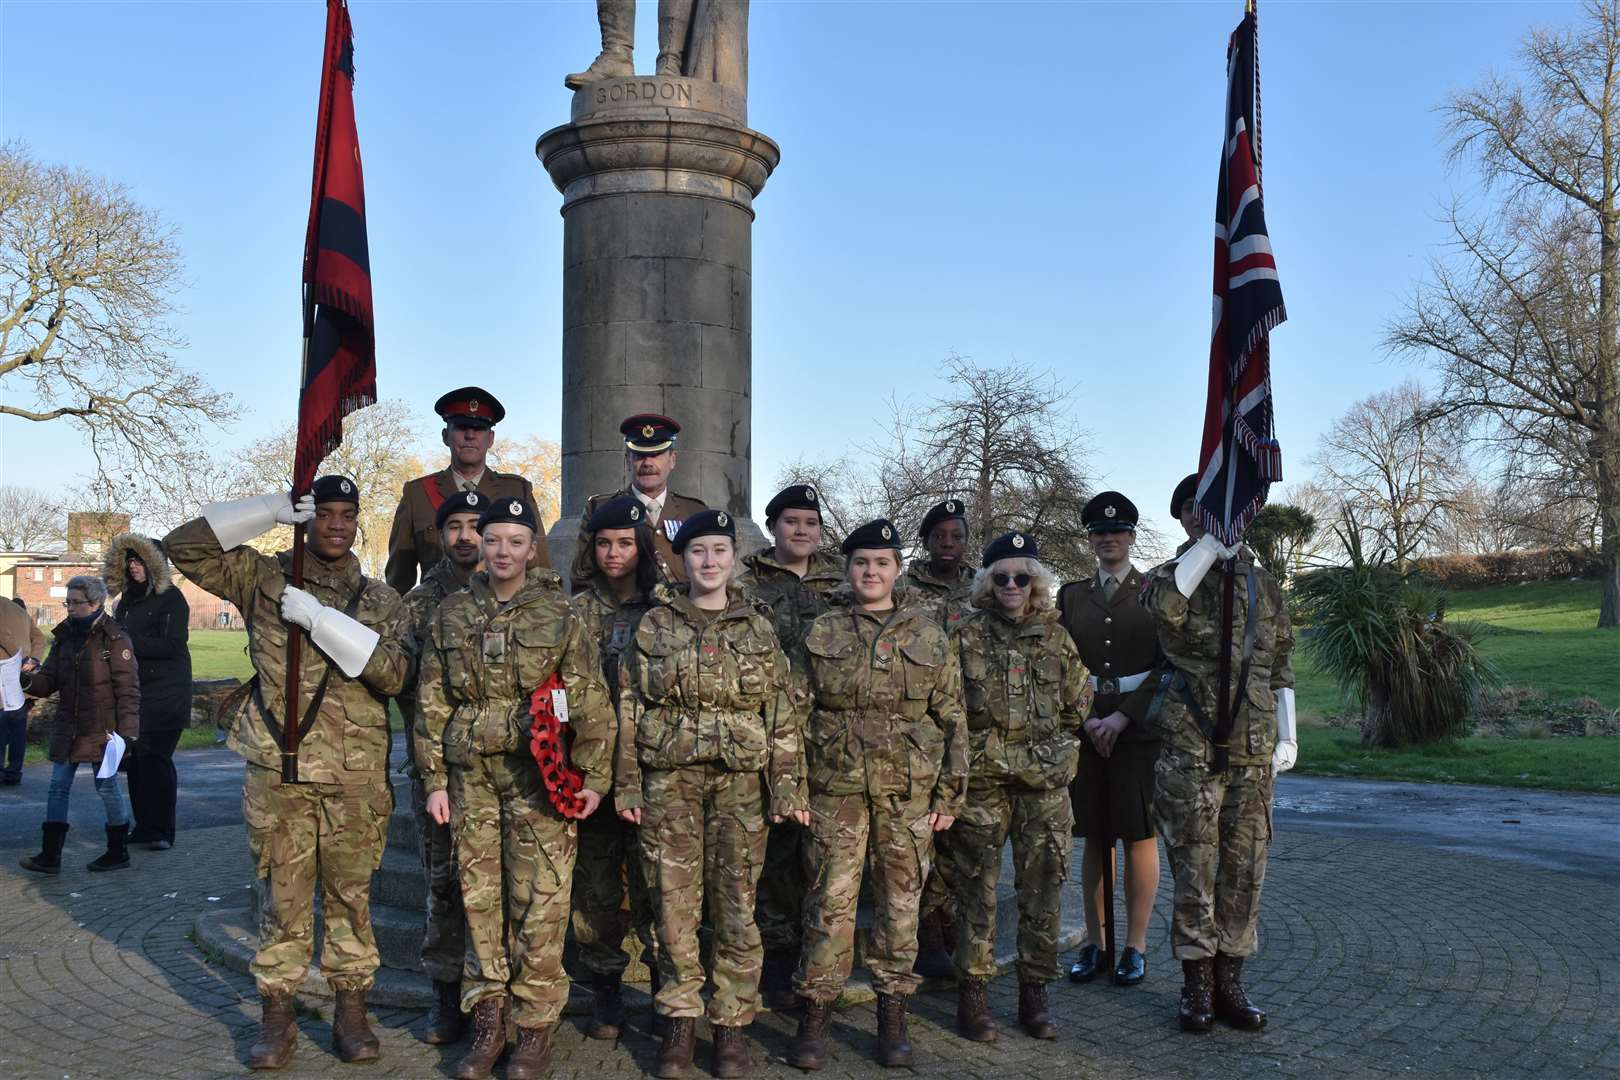 Members of the armed forces attended the service. Picture: Jason Arthur